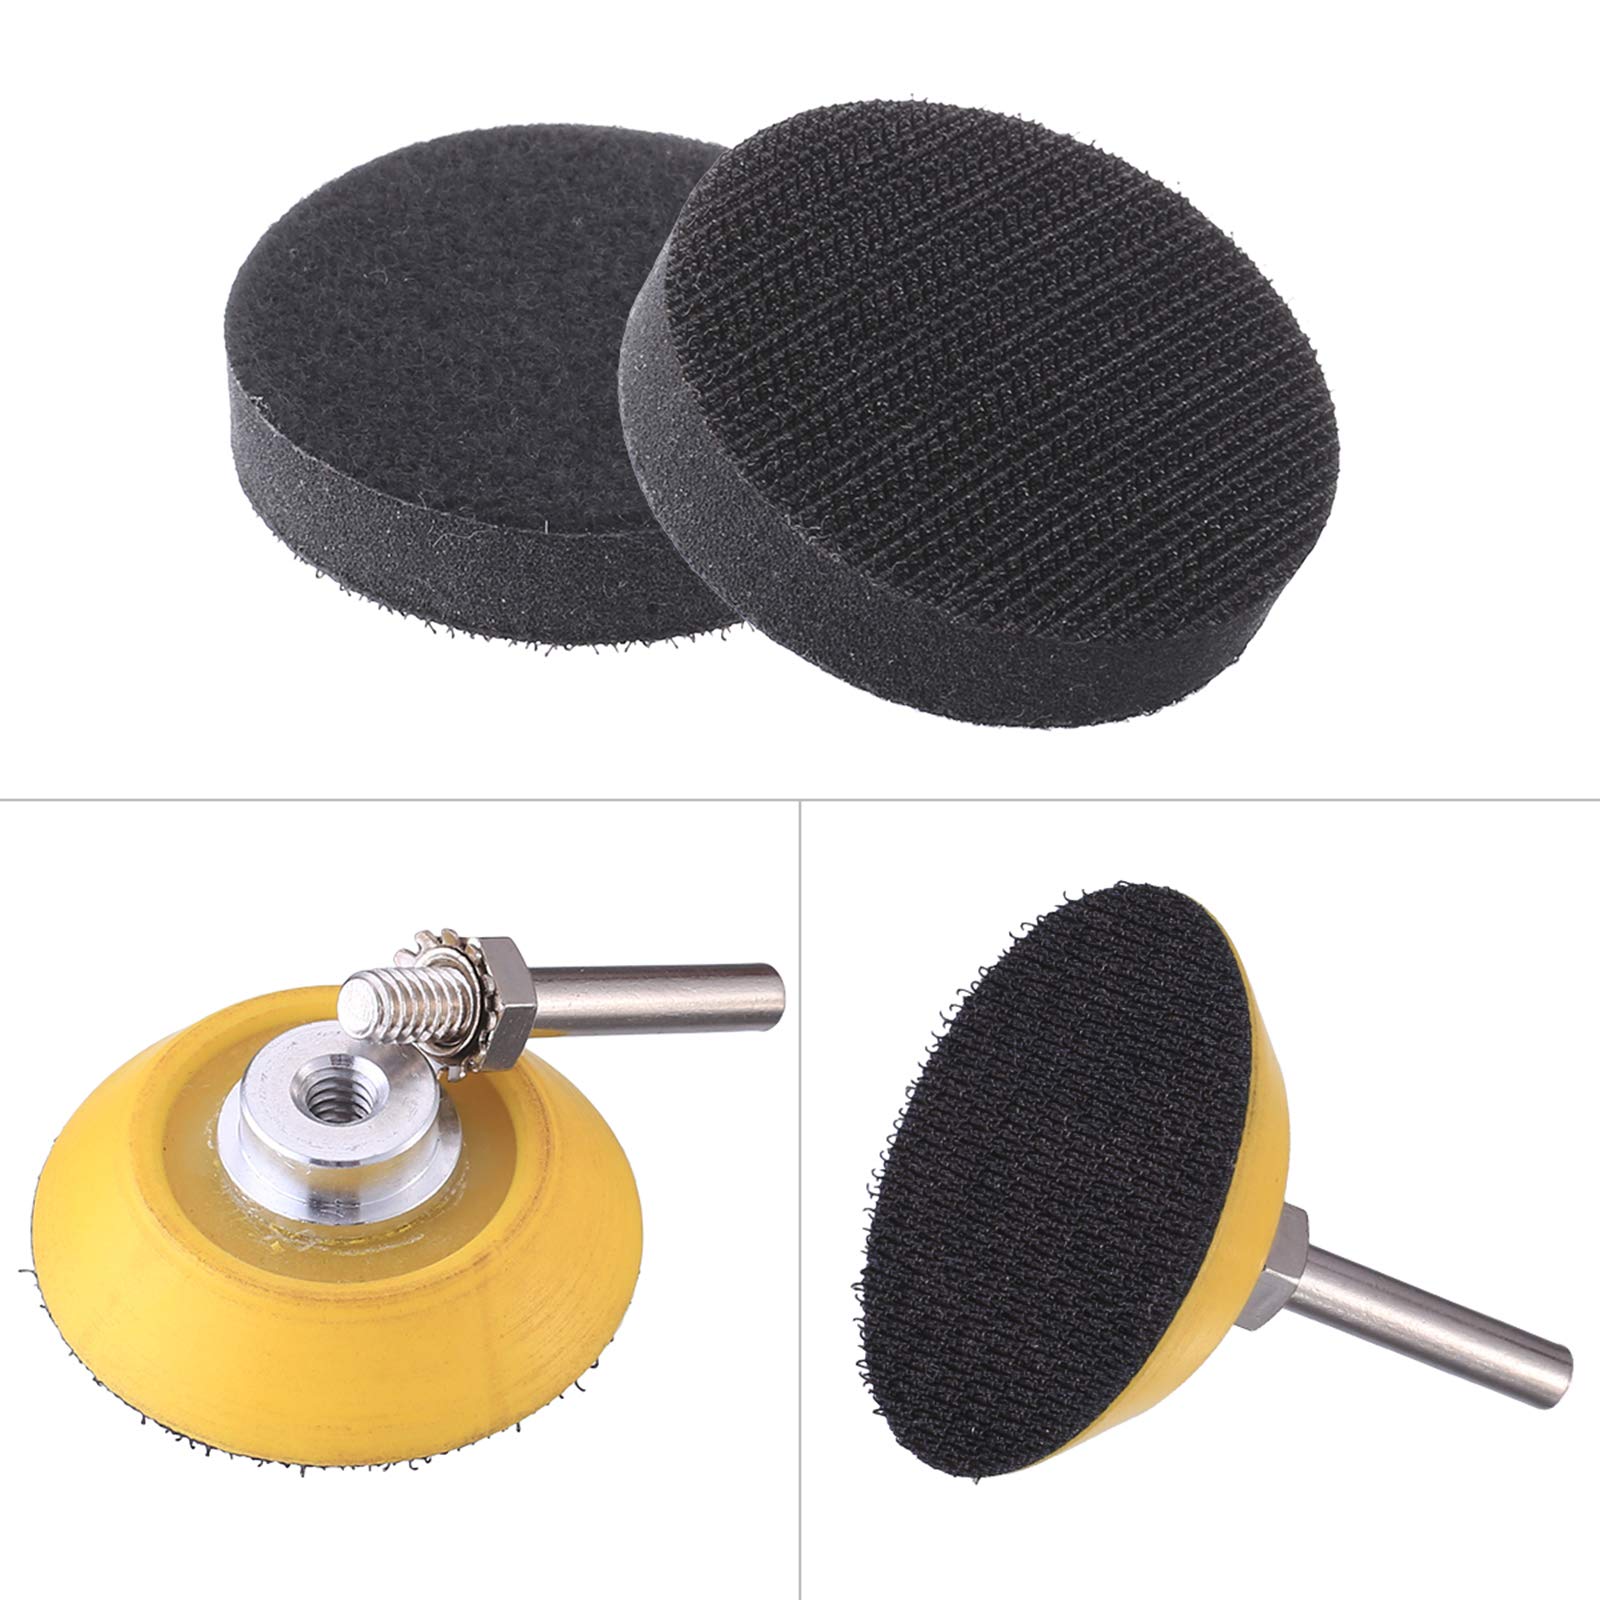 Miady 2-Inch Sanding Discs with 1 pc 2 Inch Drill Shank Backing Pad, 80/100/180/240/320/400/600/800/1000/1200/2000/3000 Assorted Grits-Pack of 120